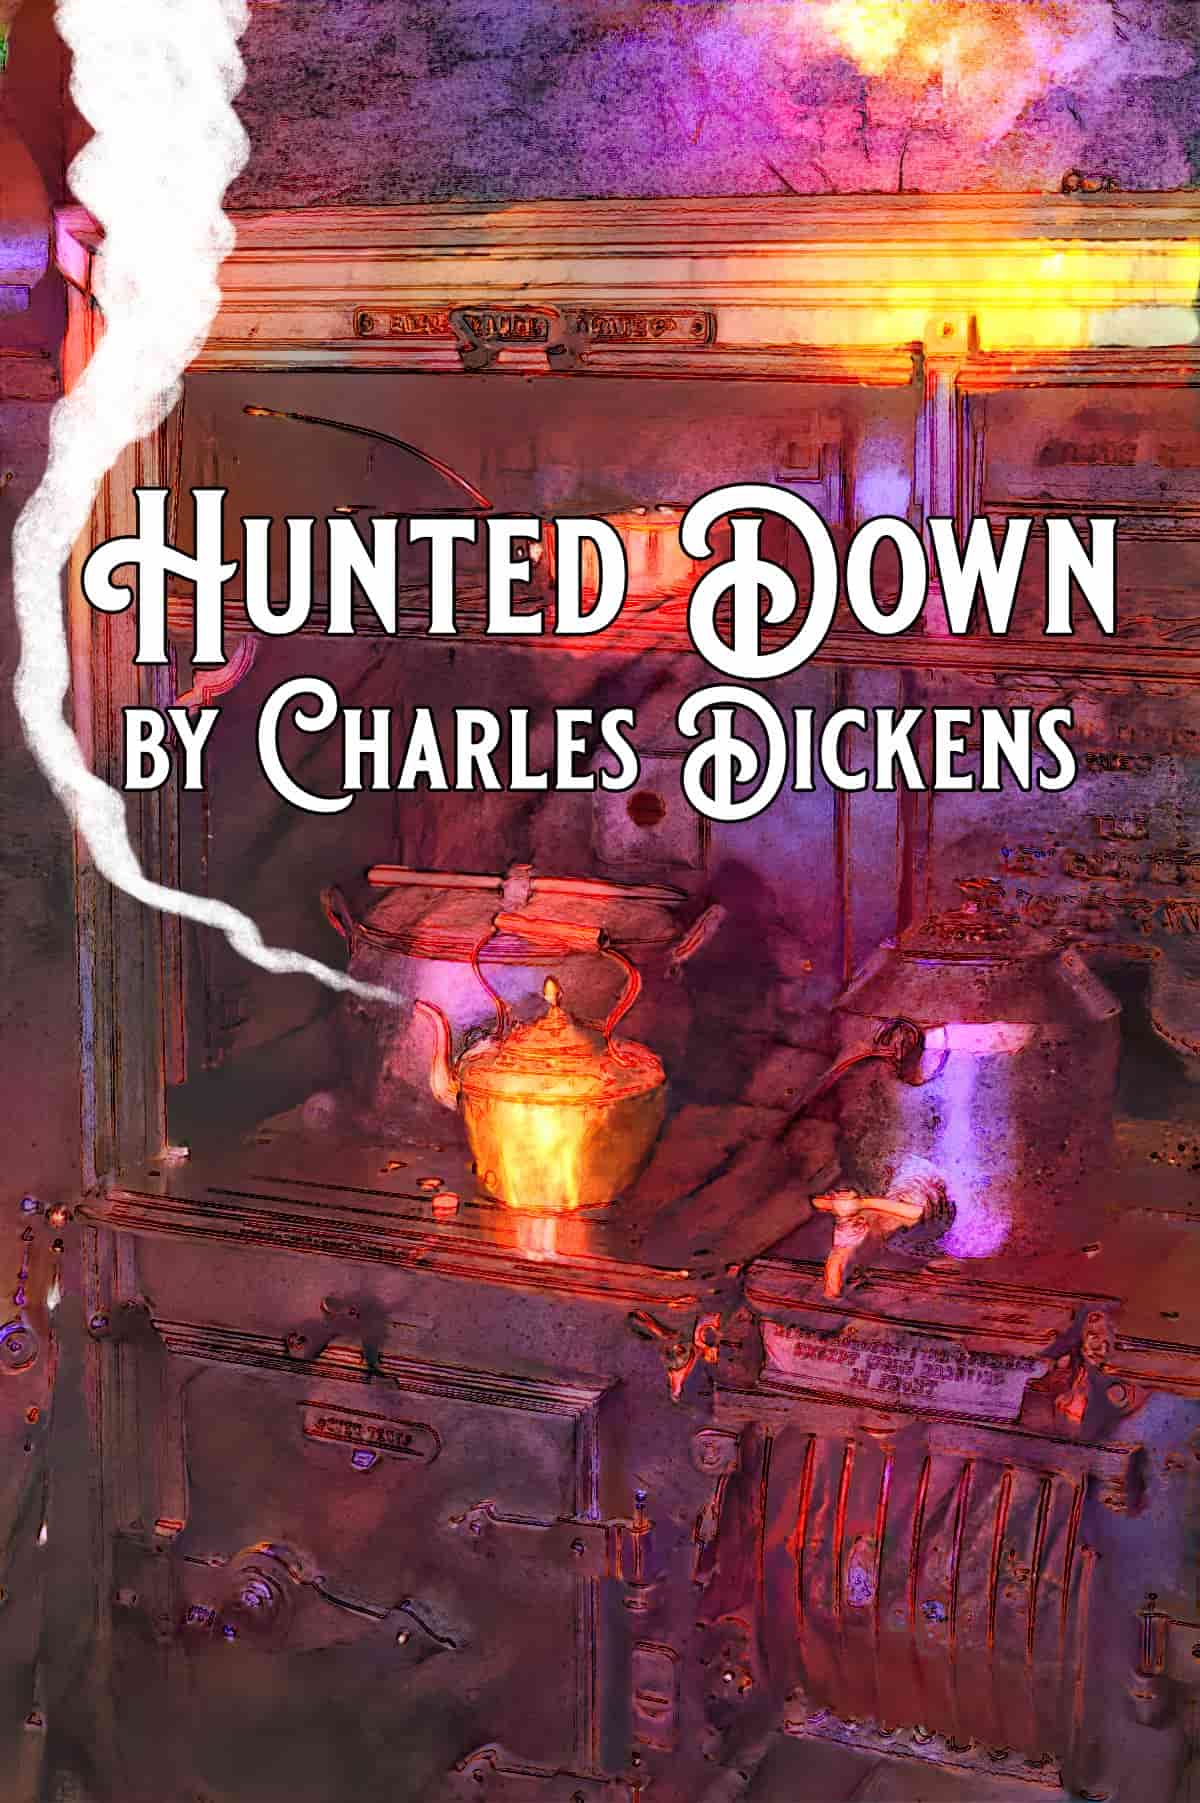 What happens in Hunted Down by Charles Dickens?